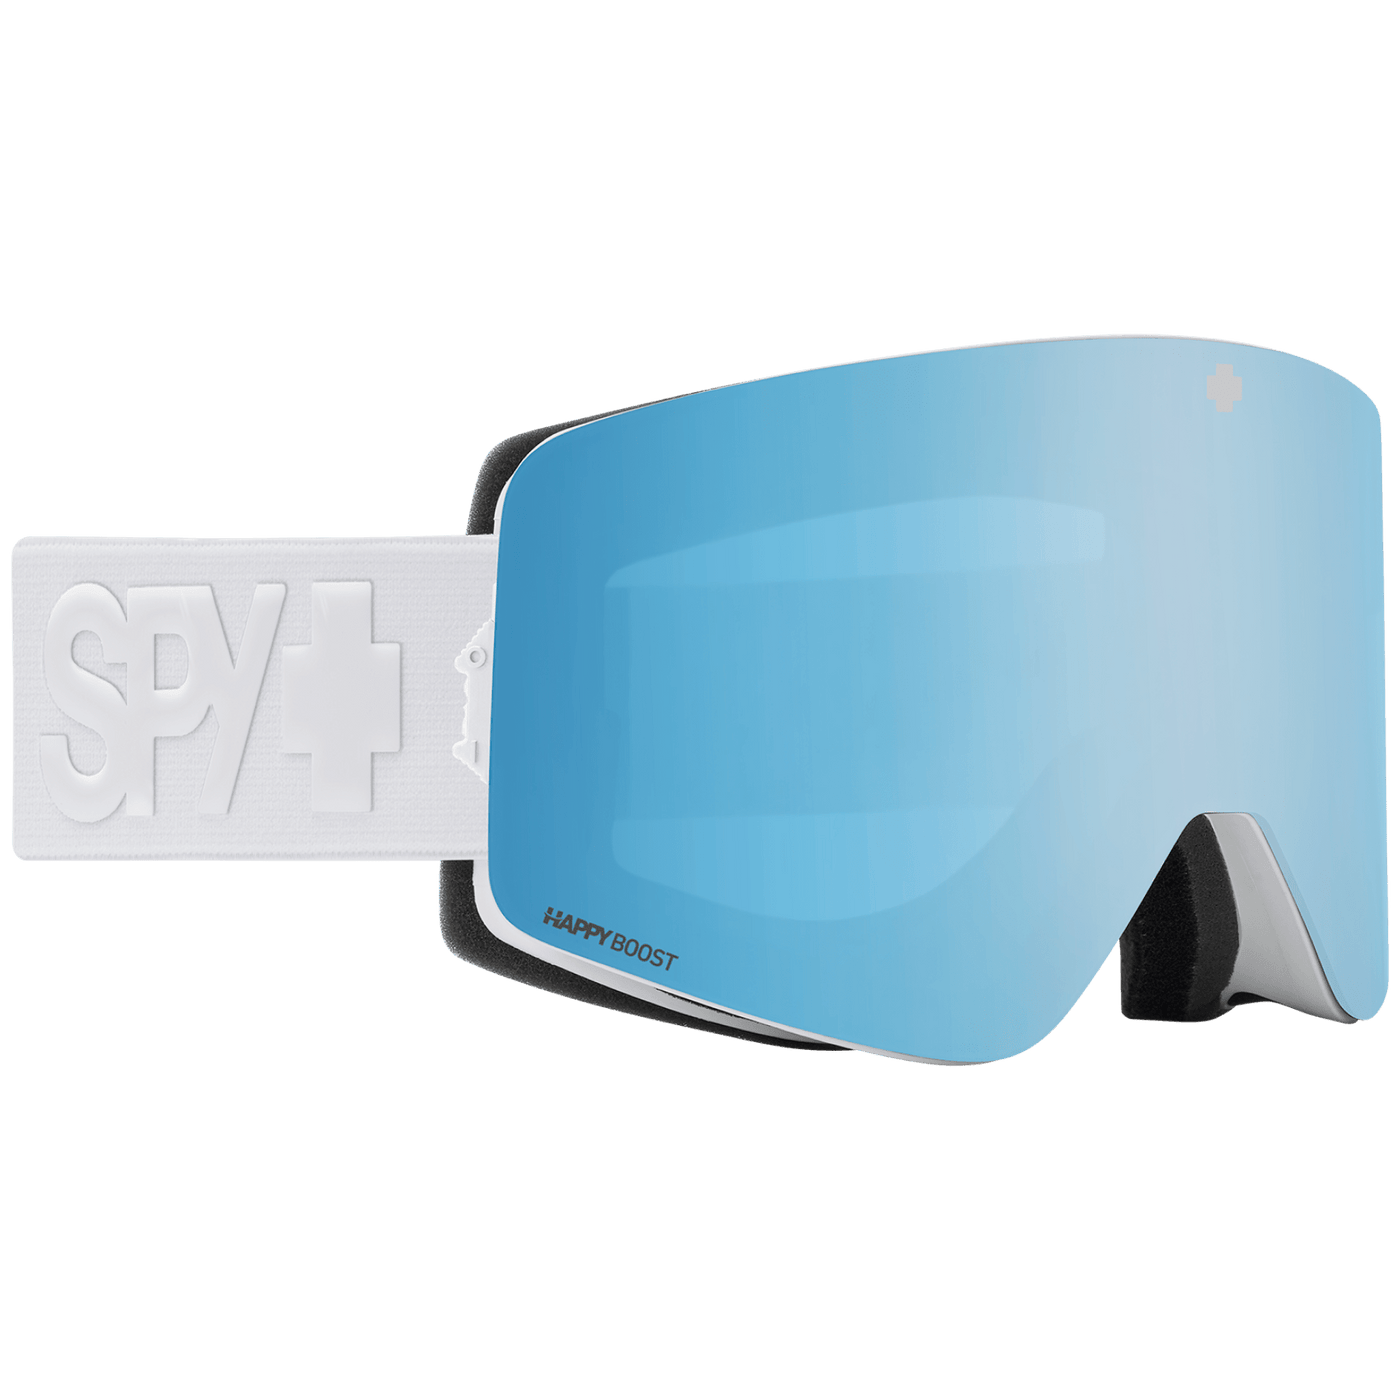 SPY Marauder Matte White Snow Goggles - Happy Boost Lens 8Lines Shop - Fast Shipping